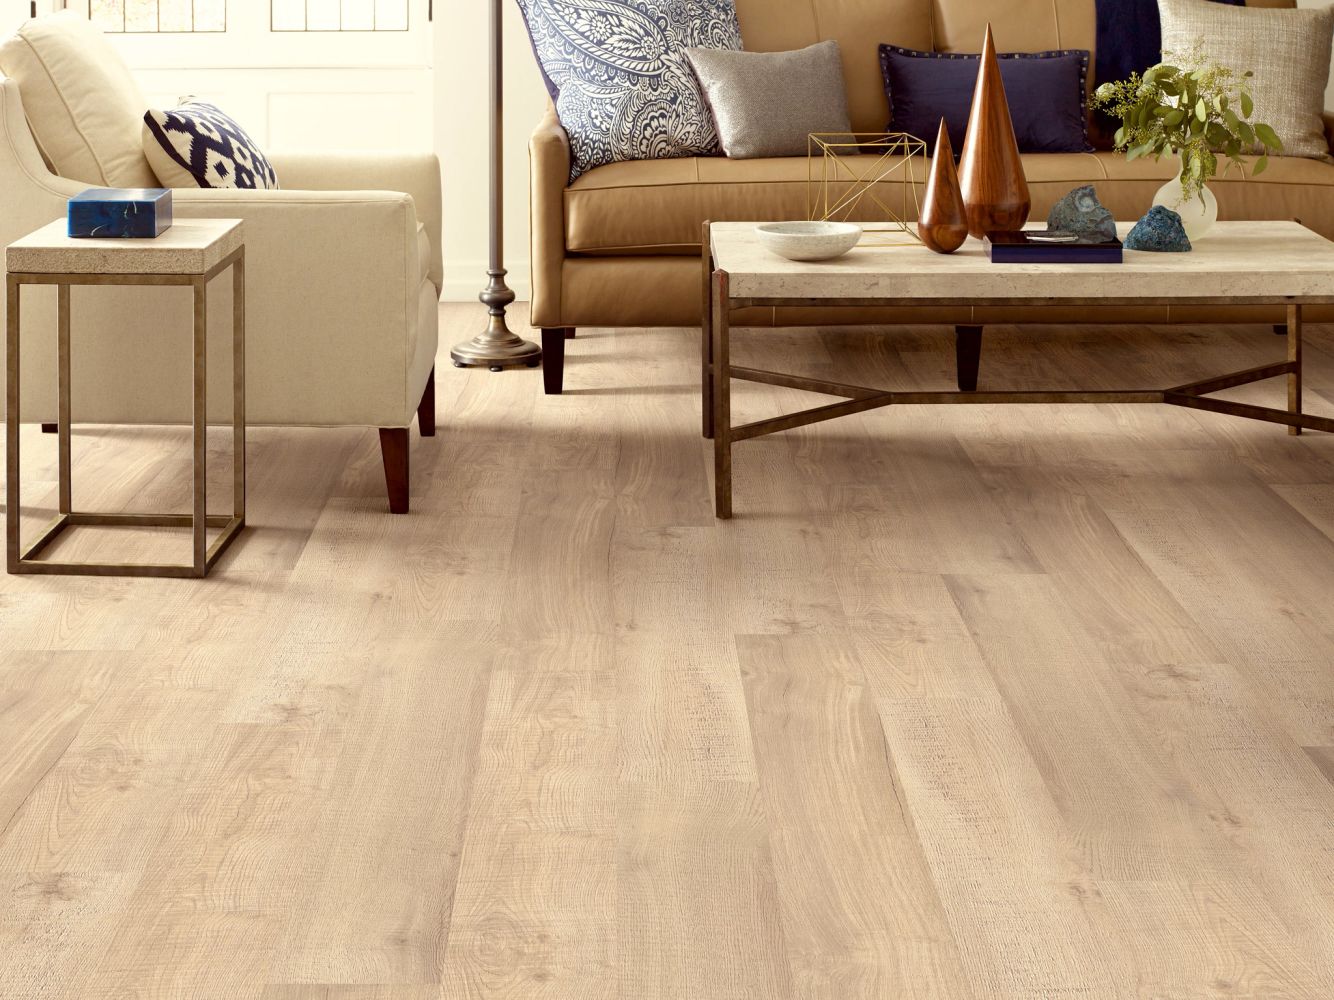 Shaw Floors Resilient Residential Prodigy Hdr Plus Nomad 01066_2038V